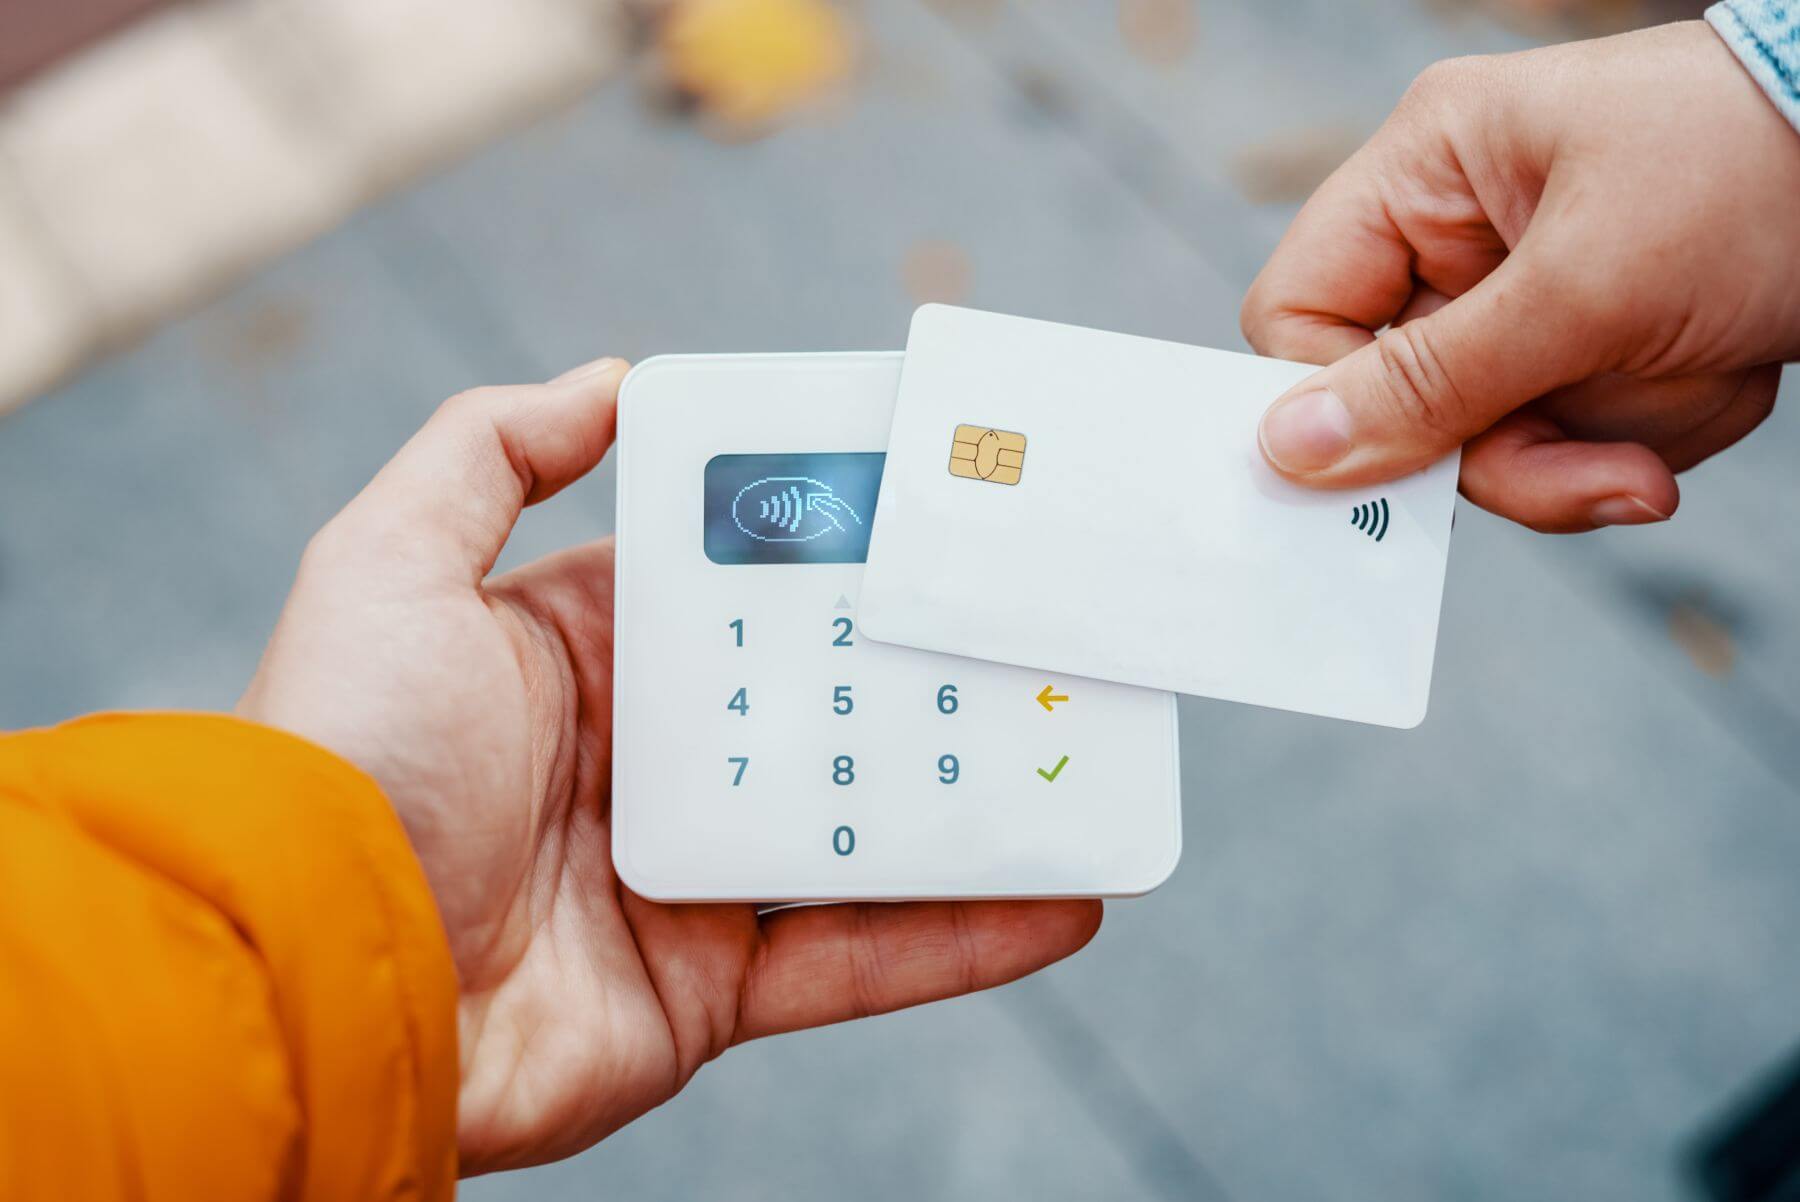 Customised payment cards from DiPocket